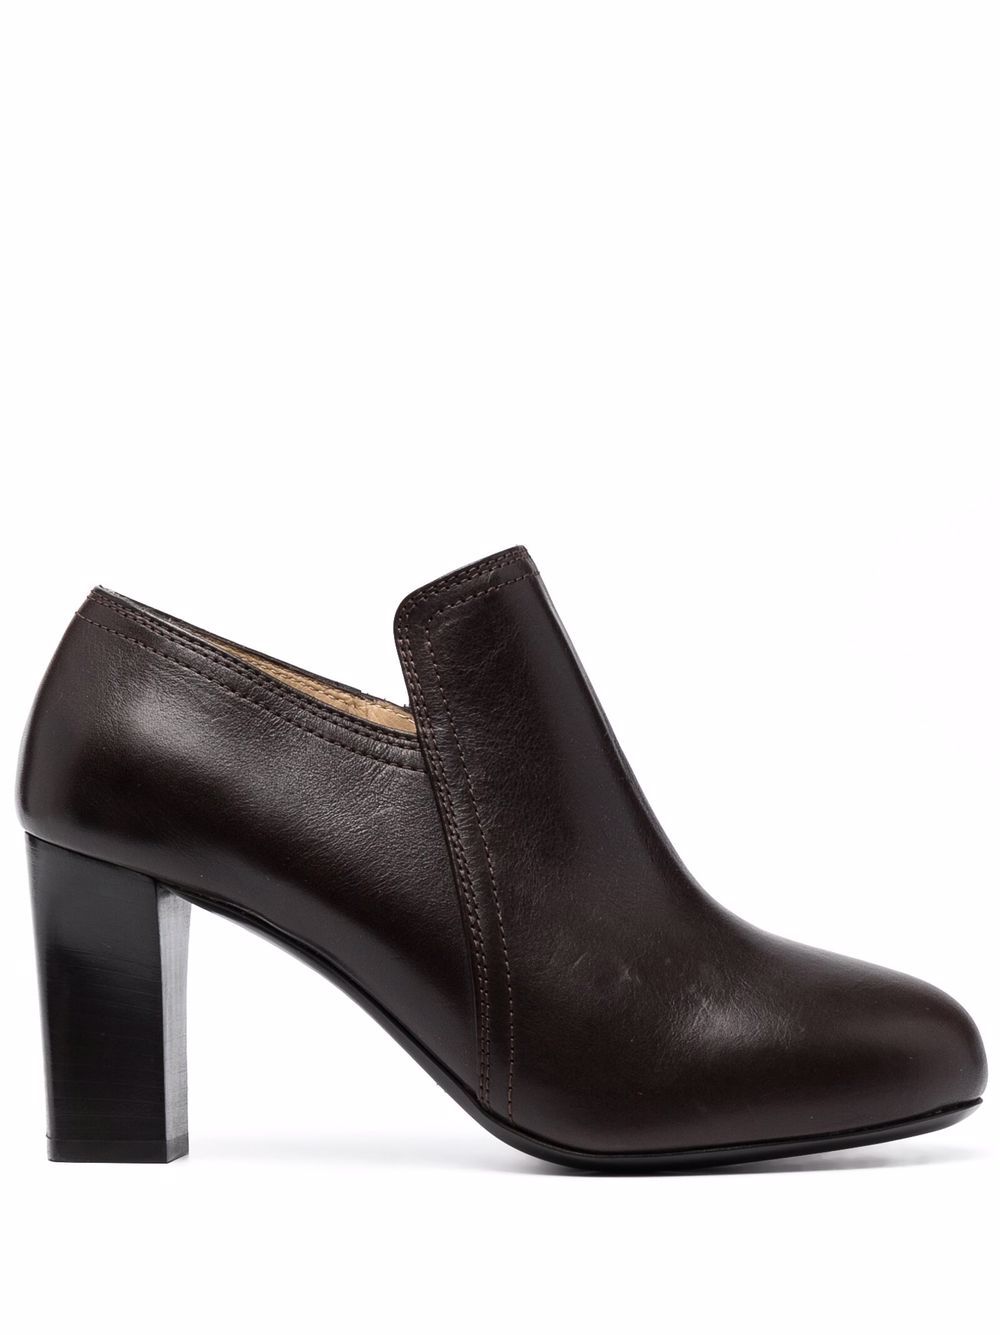 Shop Lemaire high-heel leather boots with Express Delivery - FARFETCH